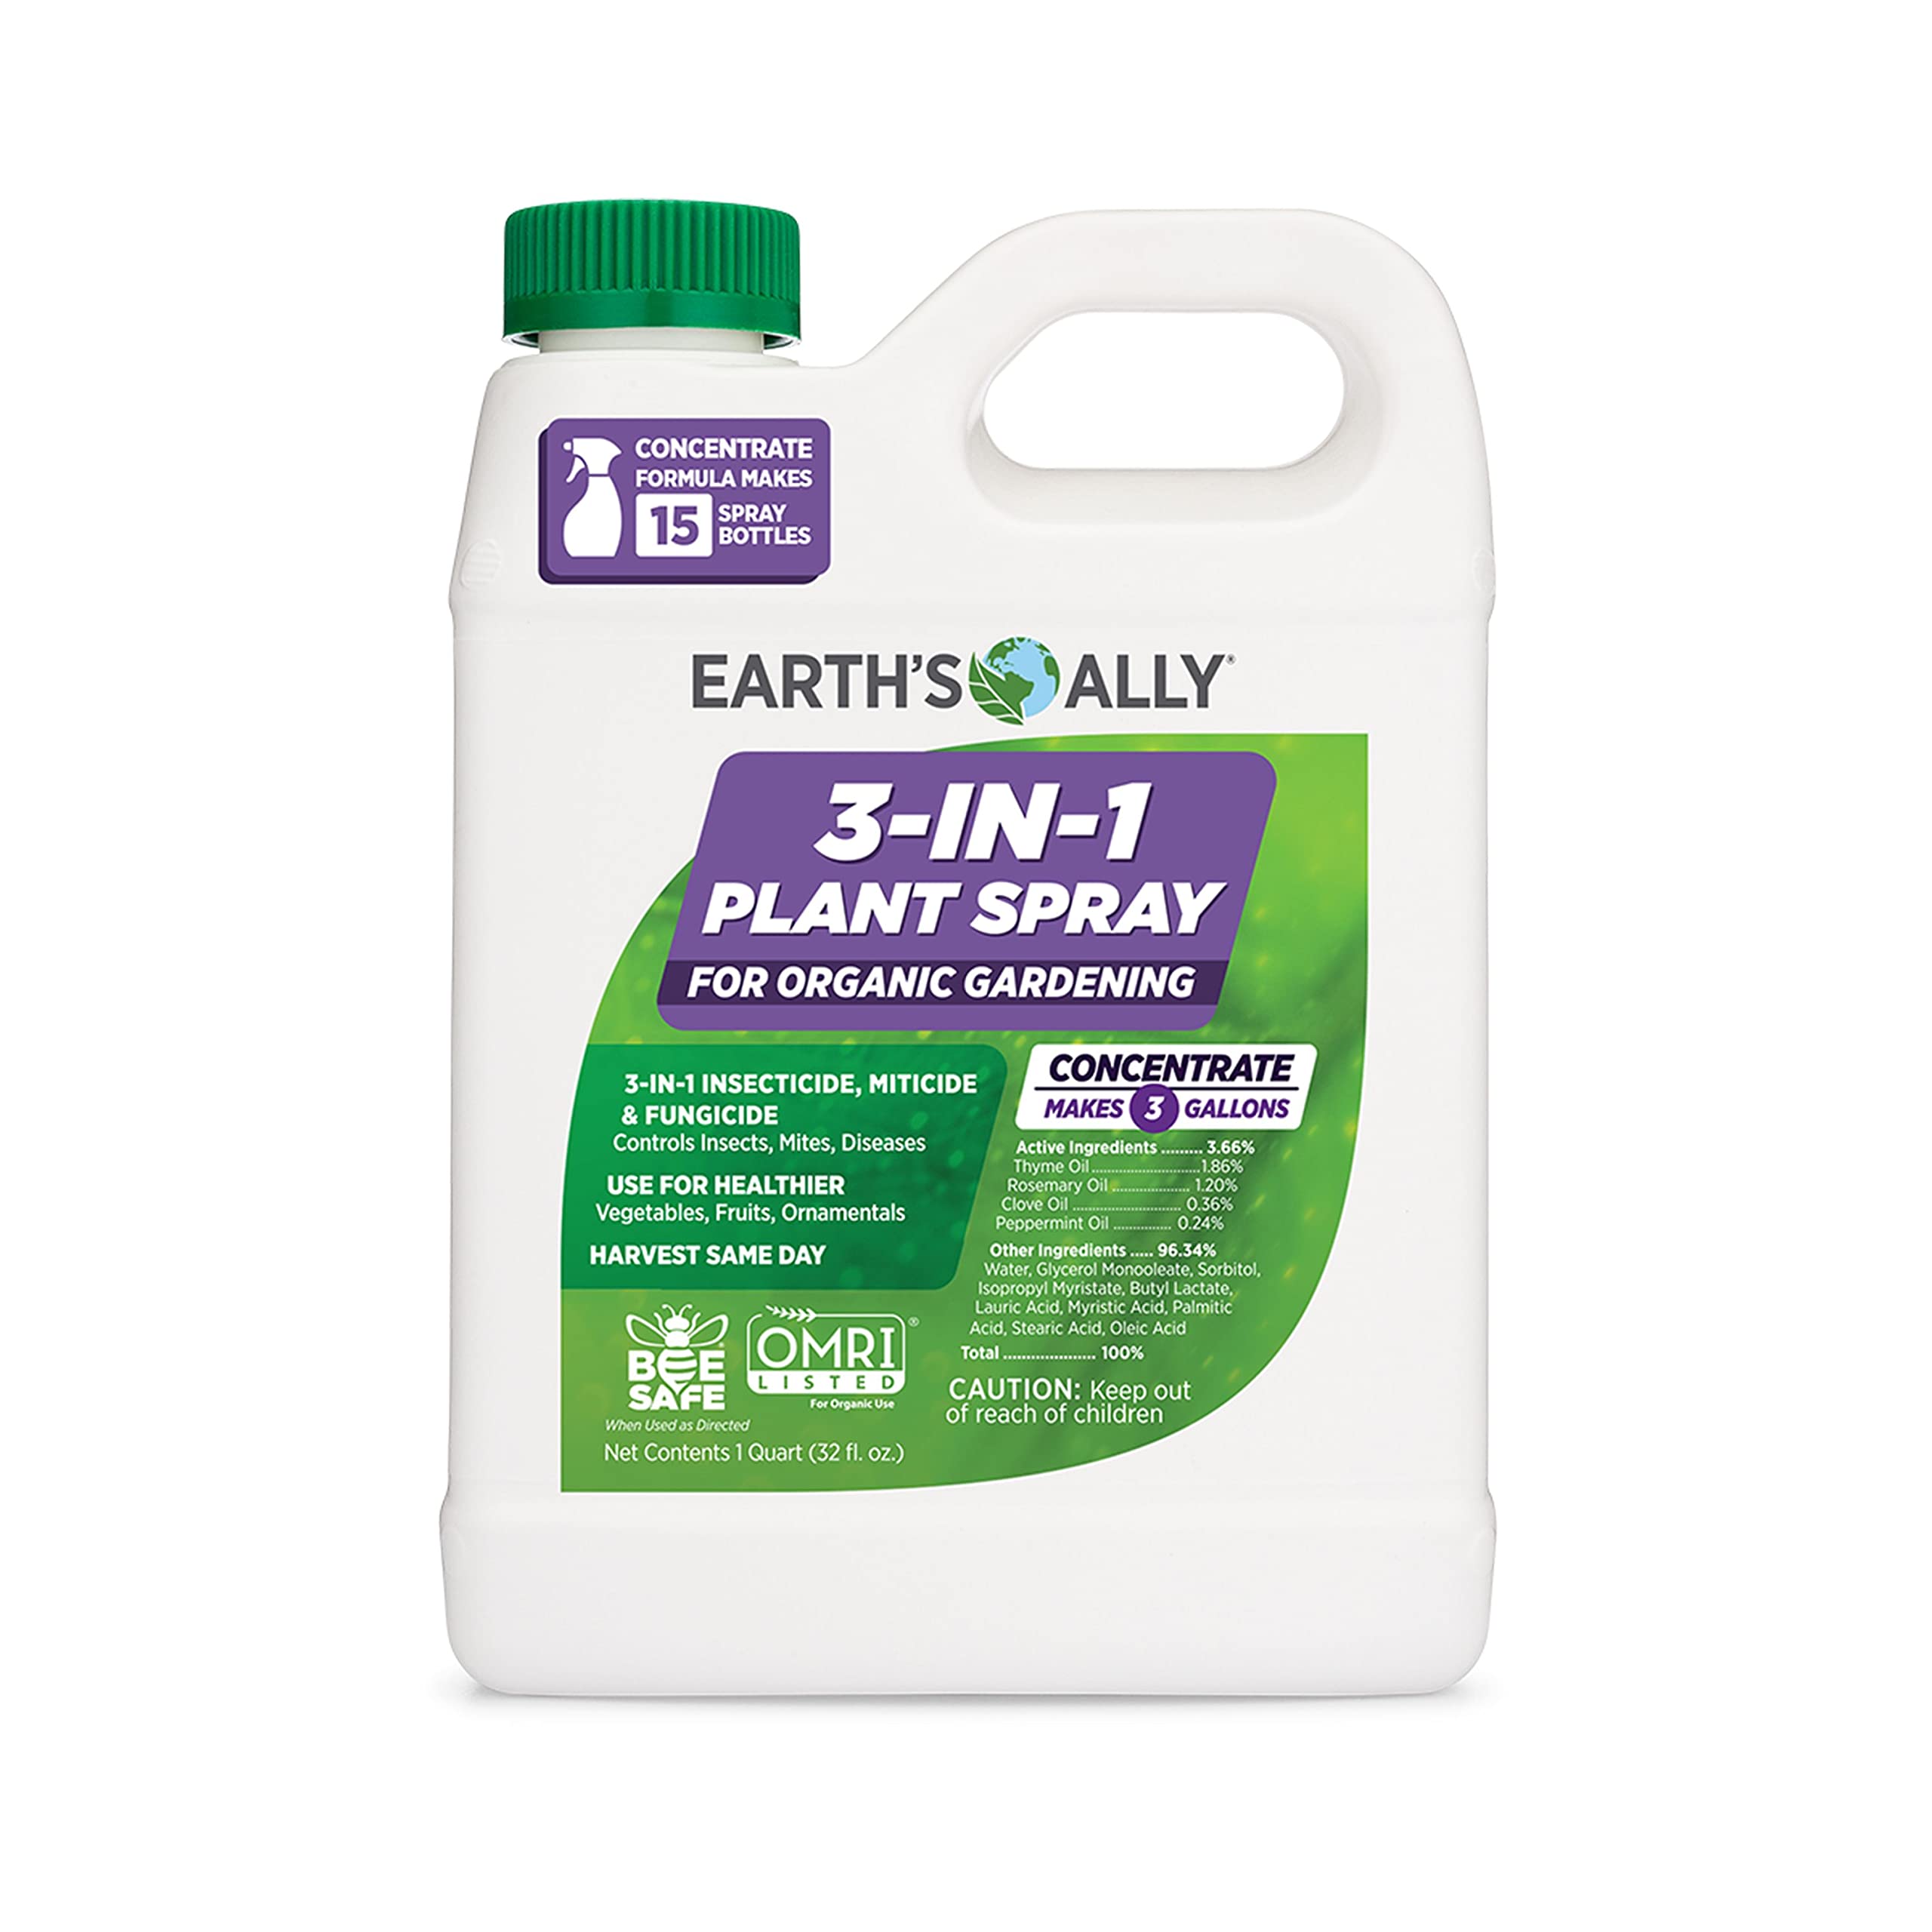 Earth's Ally 3-in-1 Plant Spray Concentrate